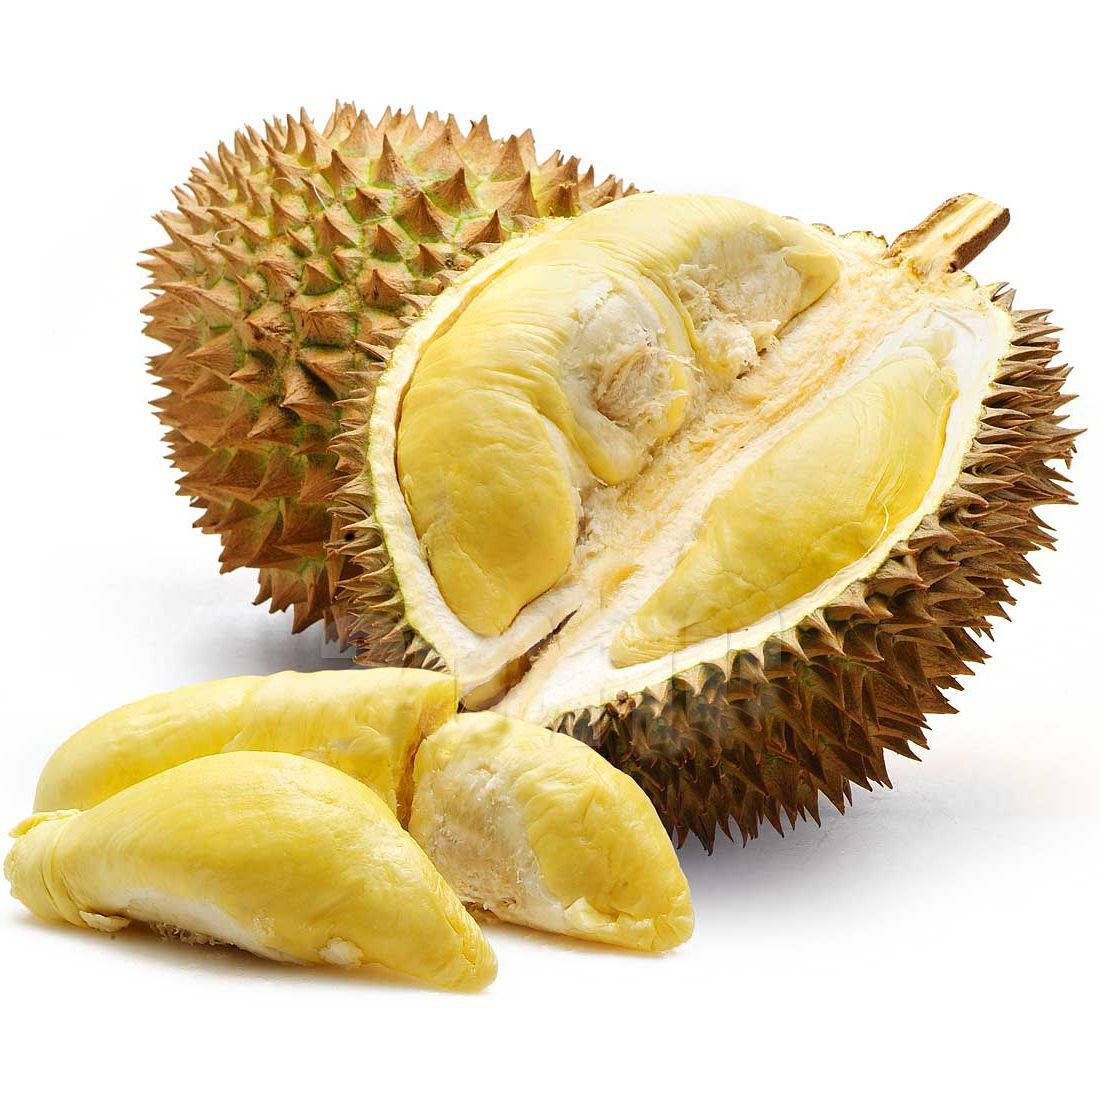 Top 999+ Durian Wallpaper Full HD, 4K✅Free to Use